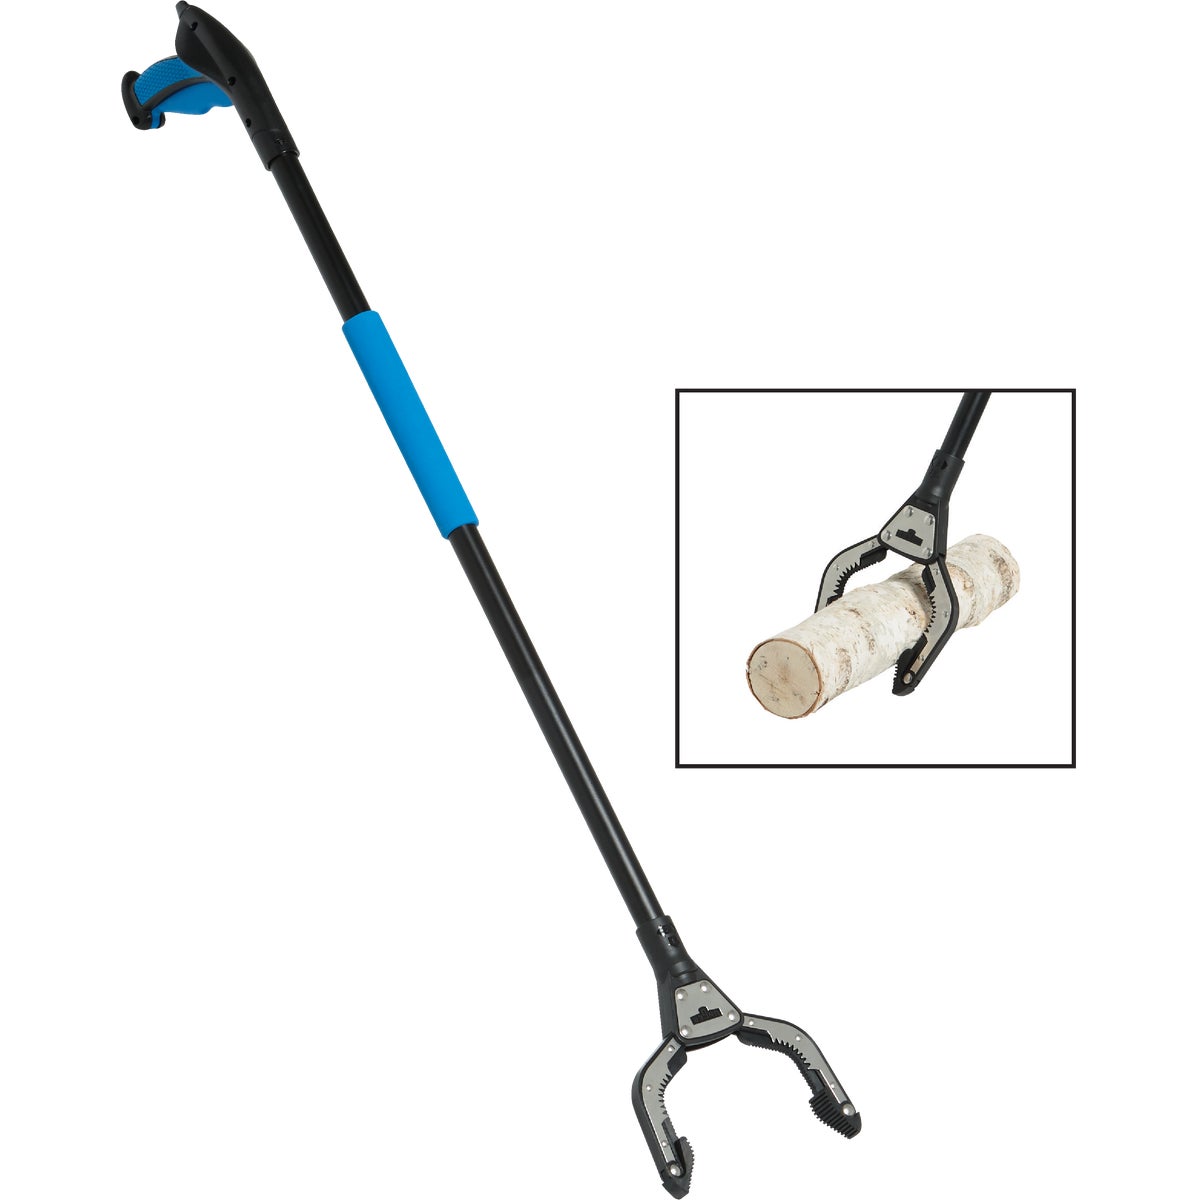 Unger Professional Rugged Reacher 42 In. Grabber Tool